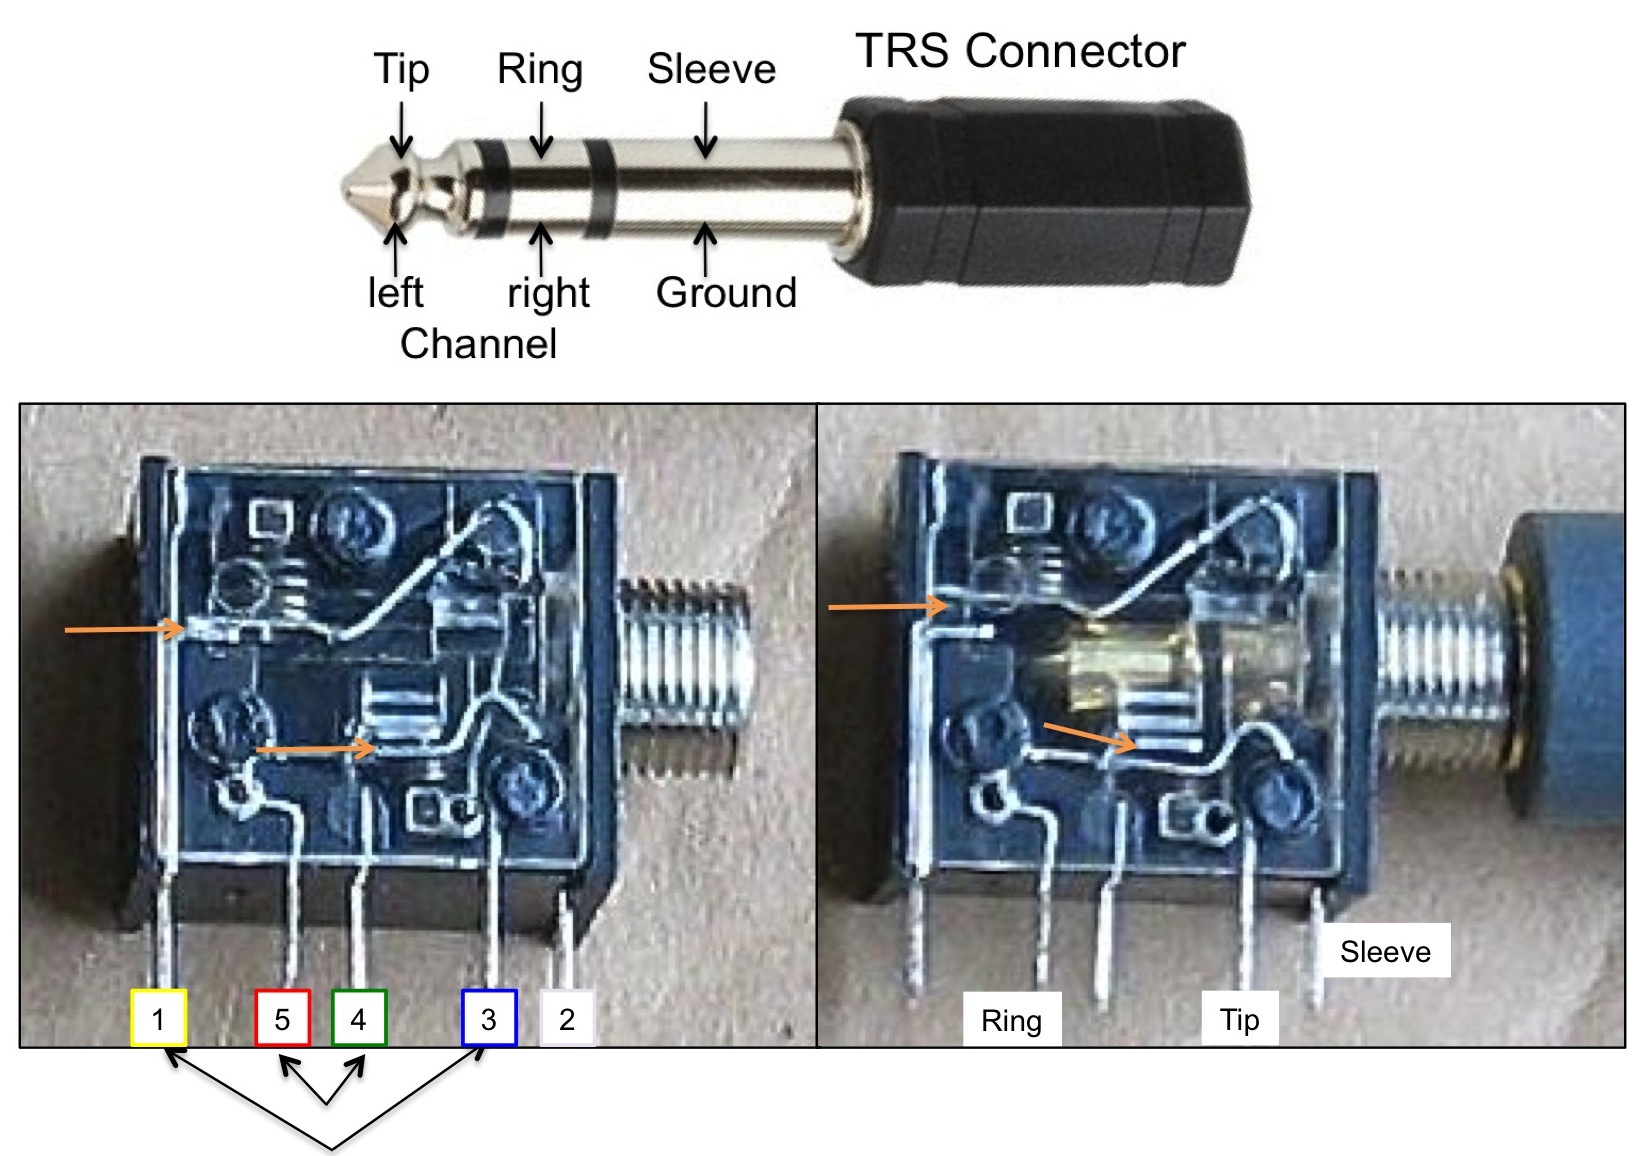 3.5 Mm Trs Wiring Diagram from www.sl113.org